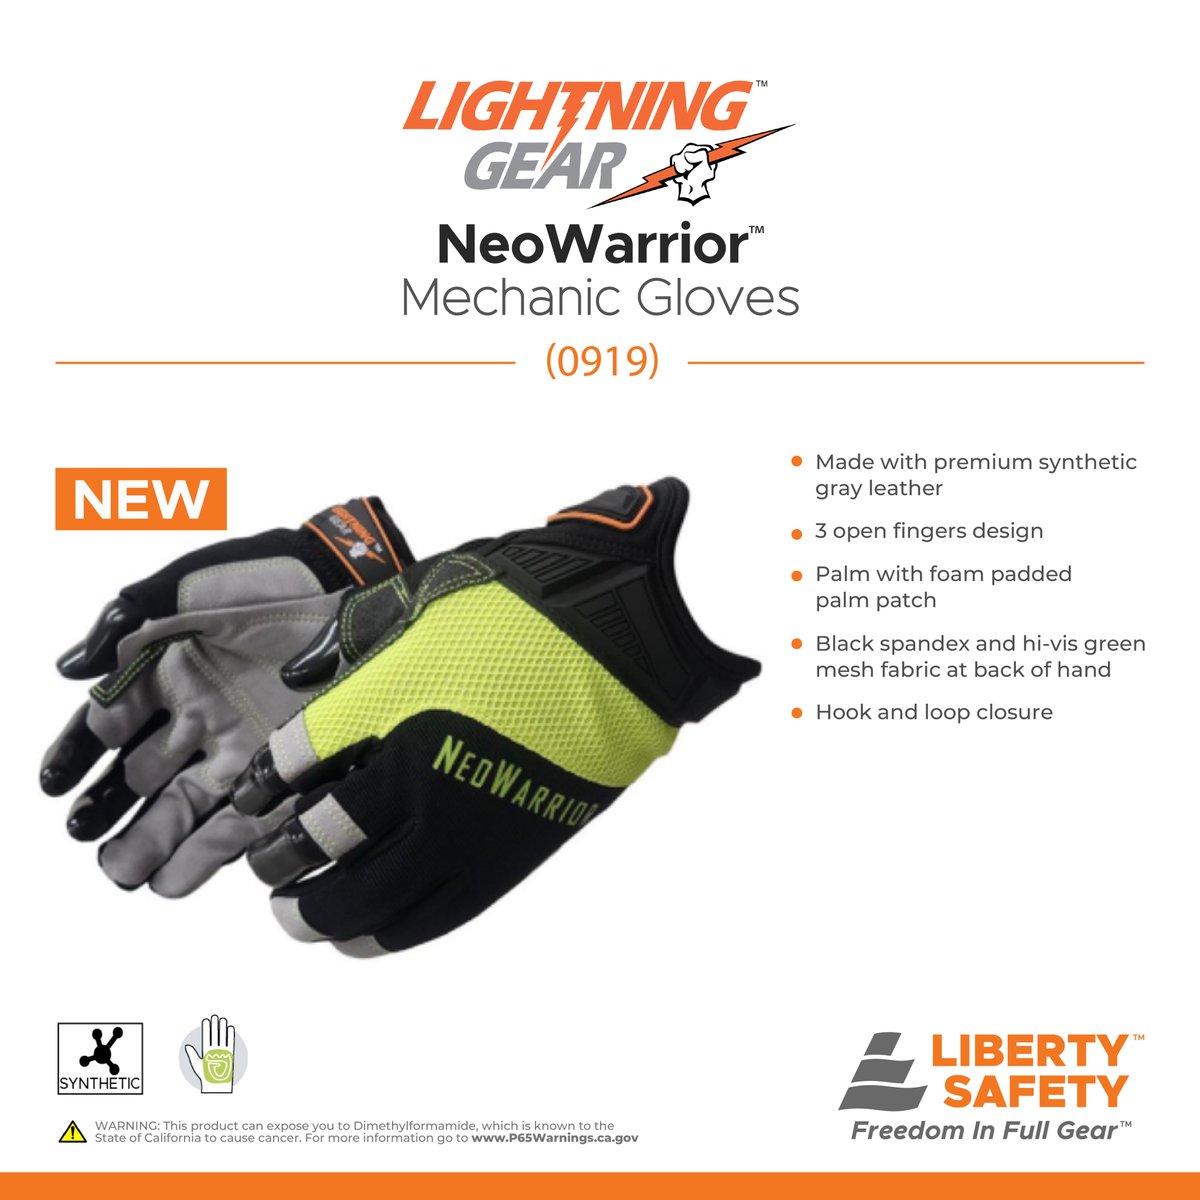 Introducing Liberty Safety's NEW Lightning Gear™ NeoWarrior™ Mechanic Gloves 0919.  Designed for mechanical protection against different risks.  Made with premium synthetic gray leather palm with foam padded palm patch. rb.gy/fdjxb #PPE #Safetygloves #LibertySafety